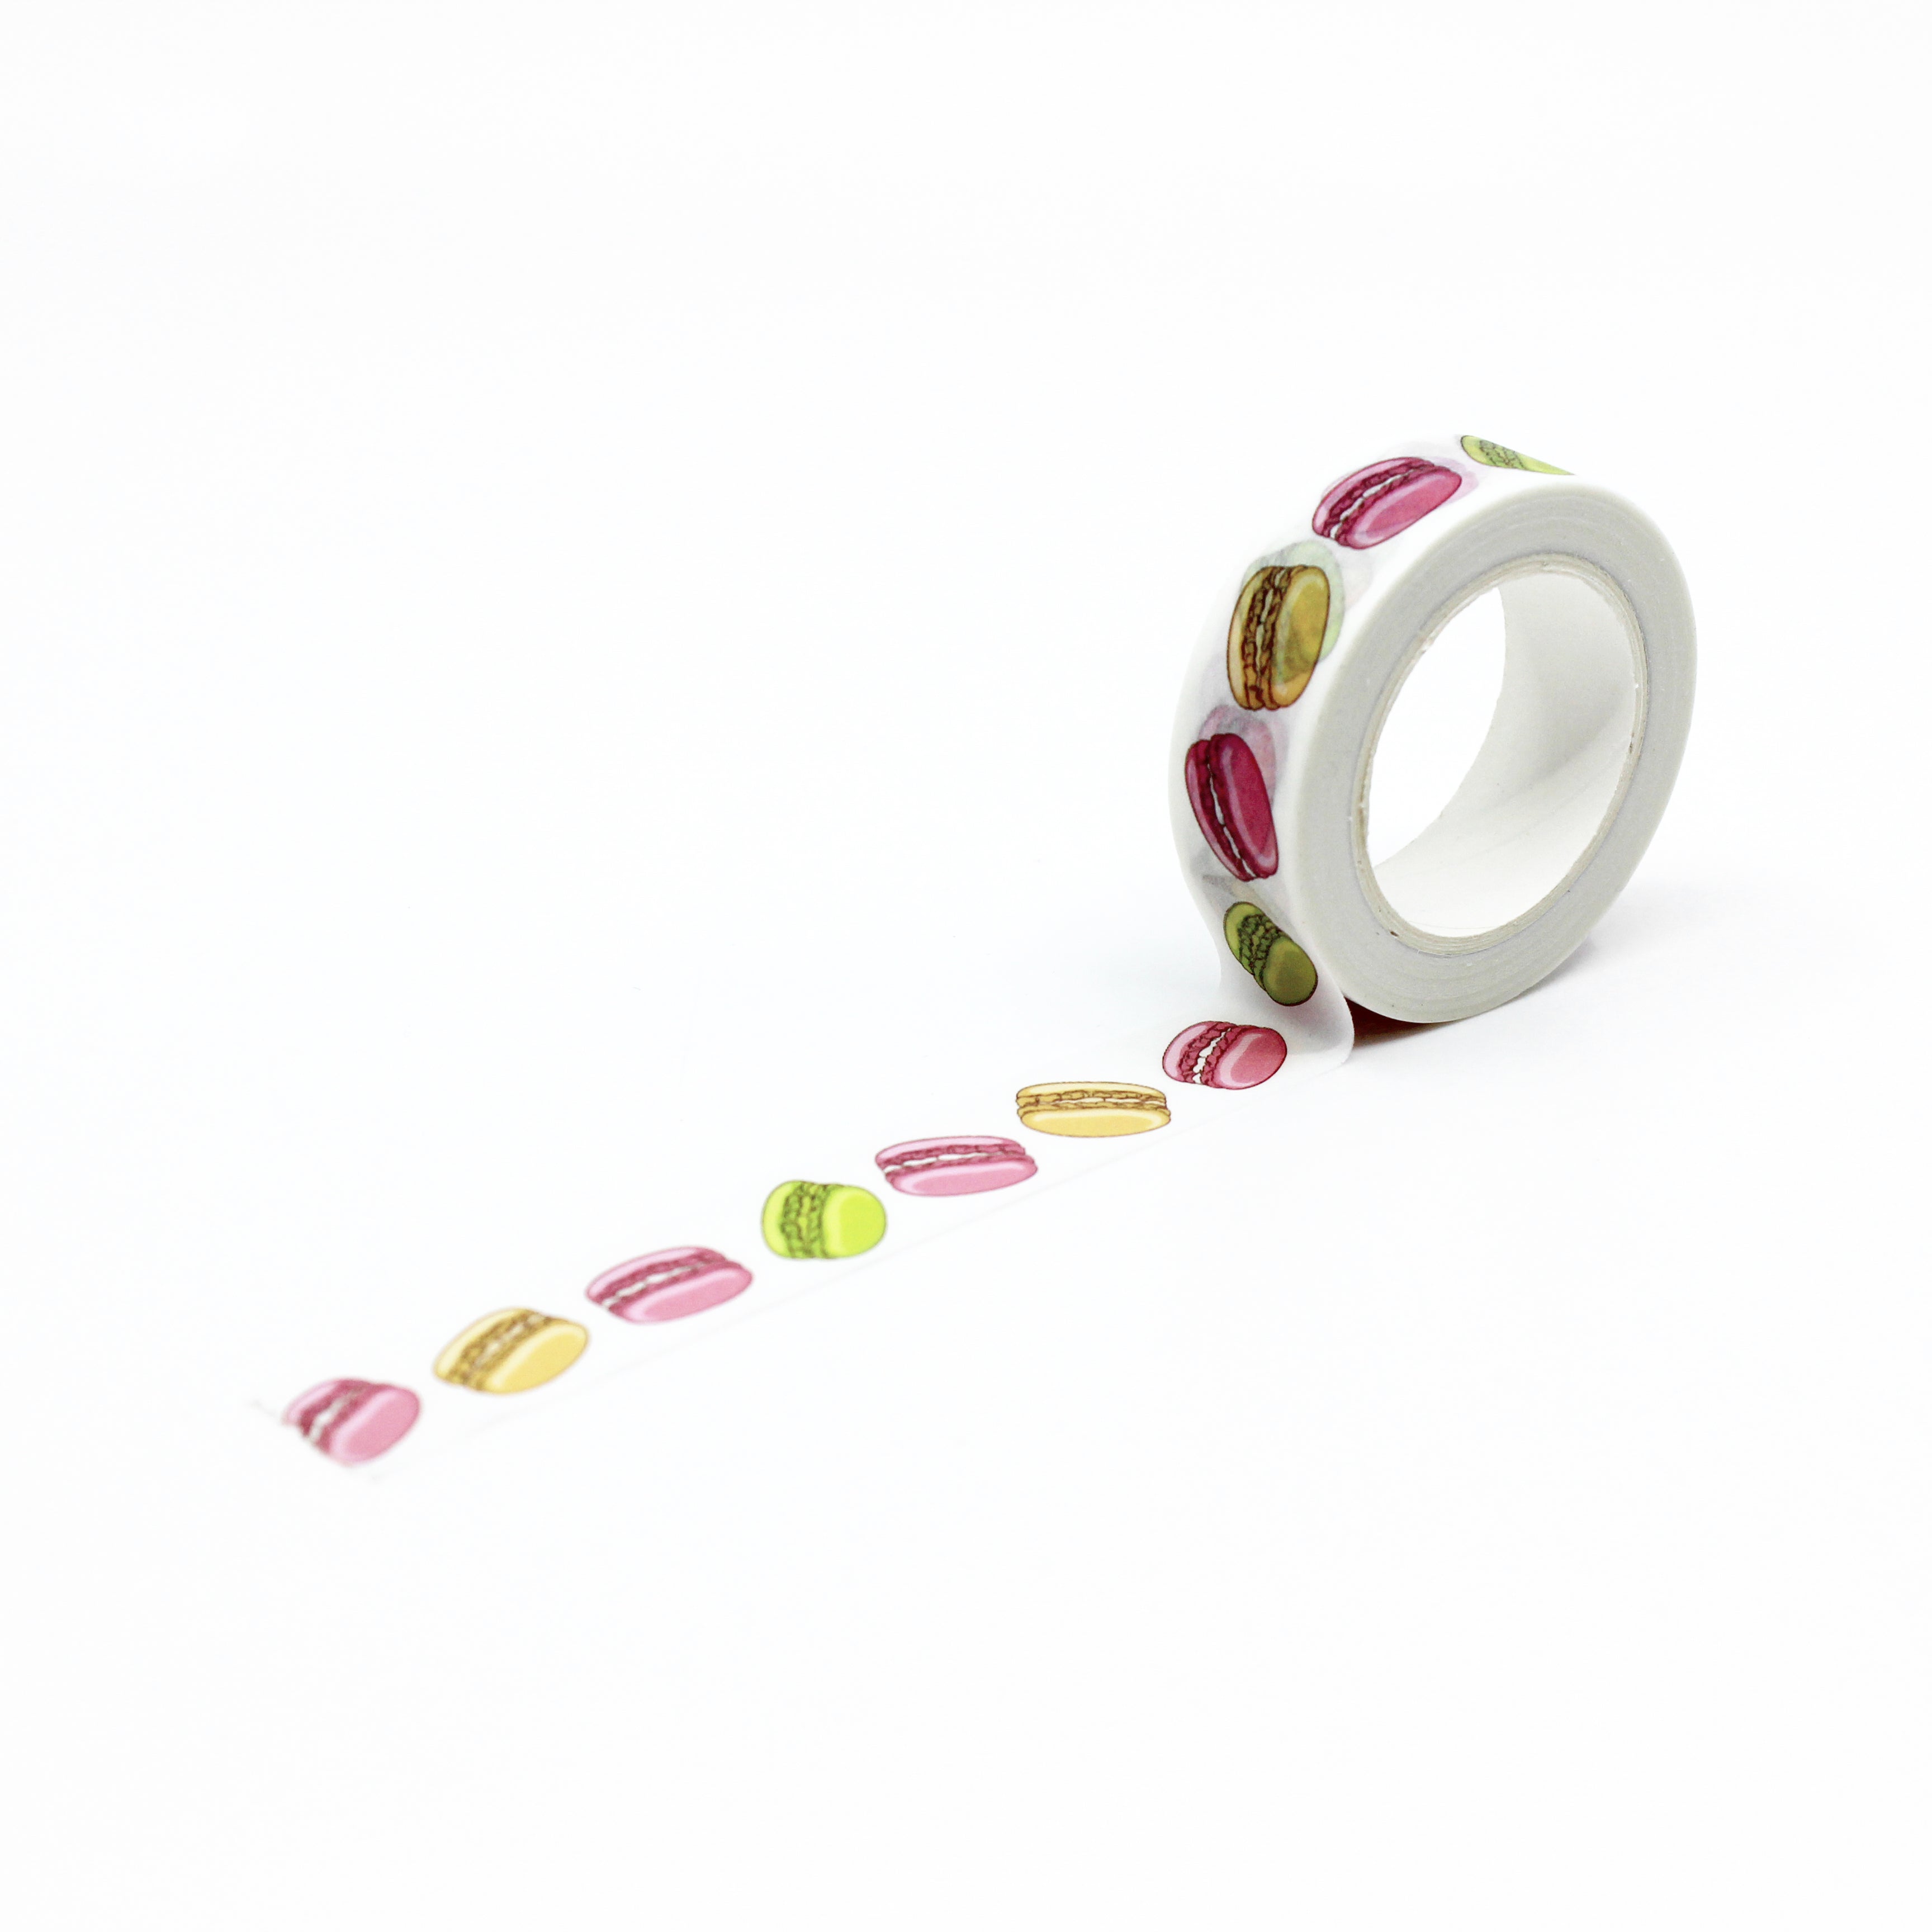 Add a sweet touch to your crafts with our Colorful Macaroons Cake Washi Tape, adorned with delightful macaroon illustrations. Perfect for adding a whimsical and dessert-inspired touch to your projects. This tape is sold at BBB Supplies Craft Shop. 